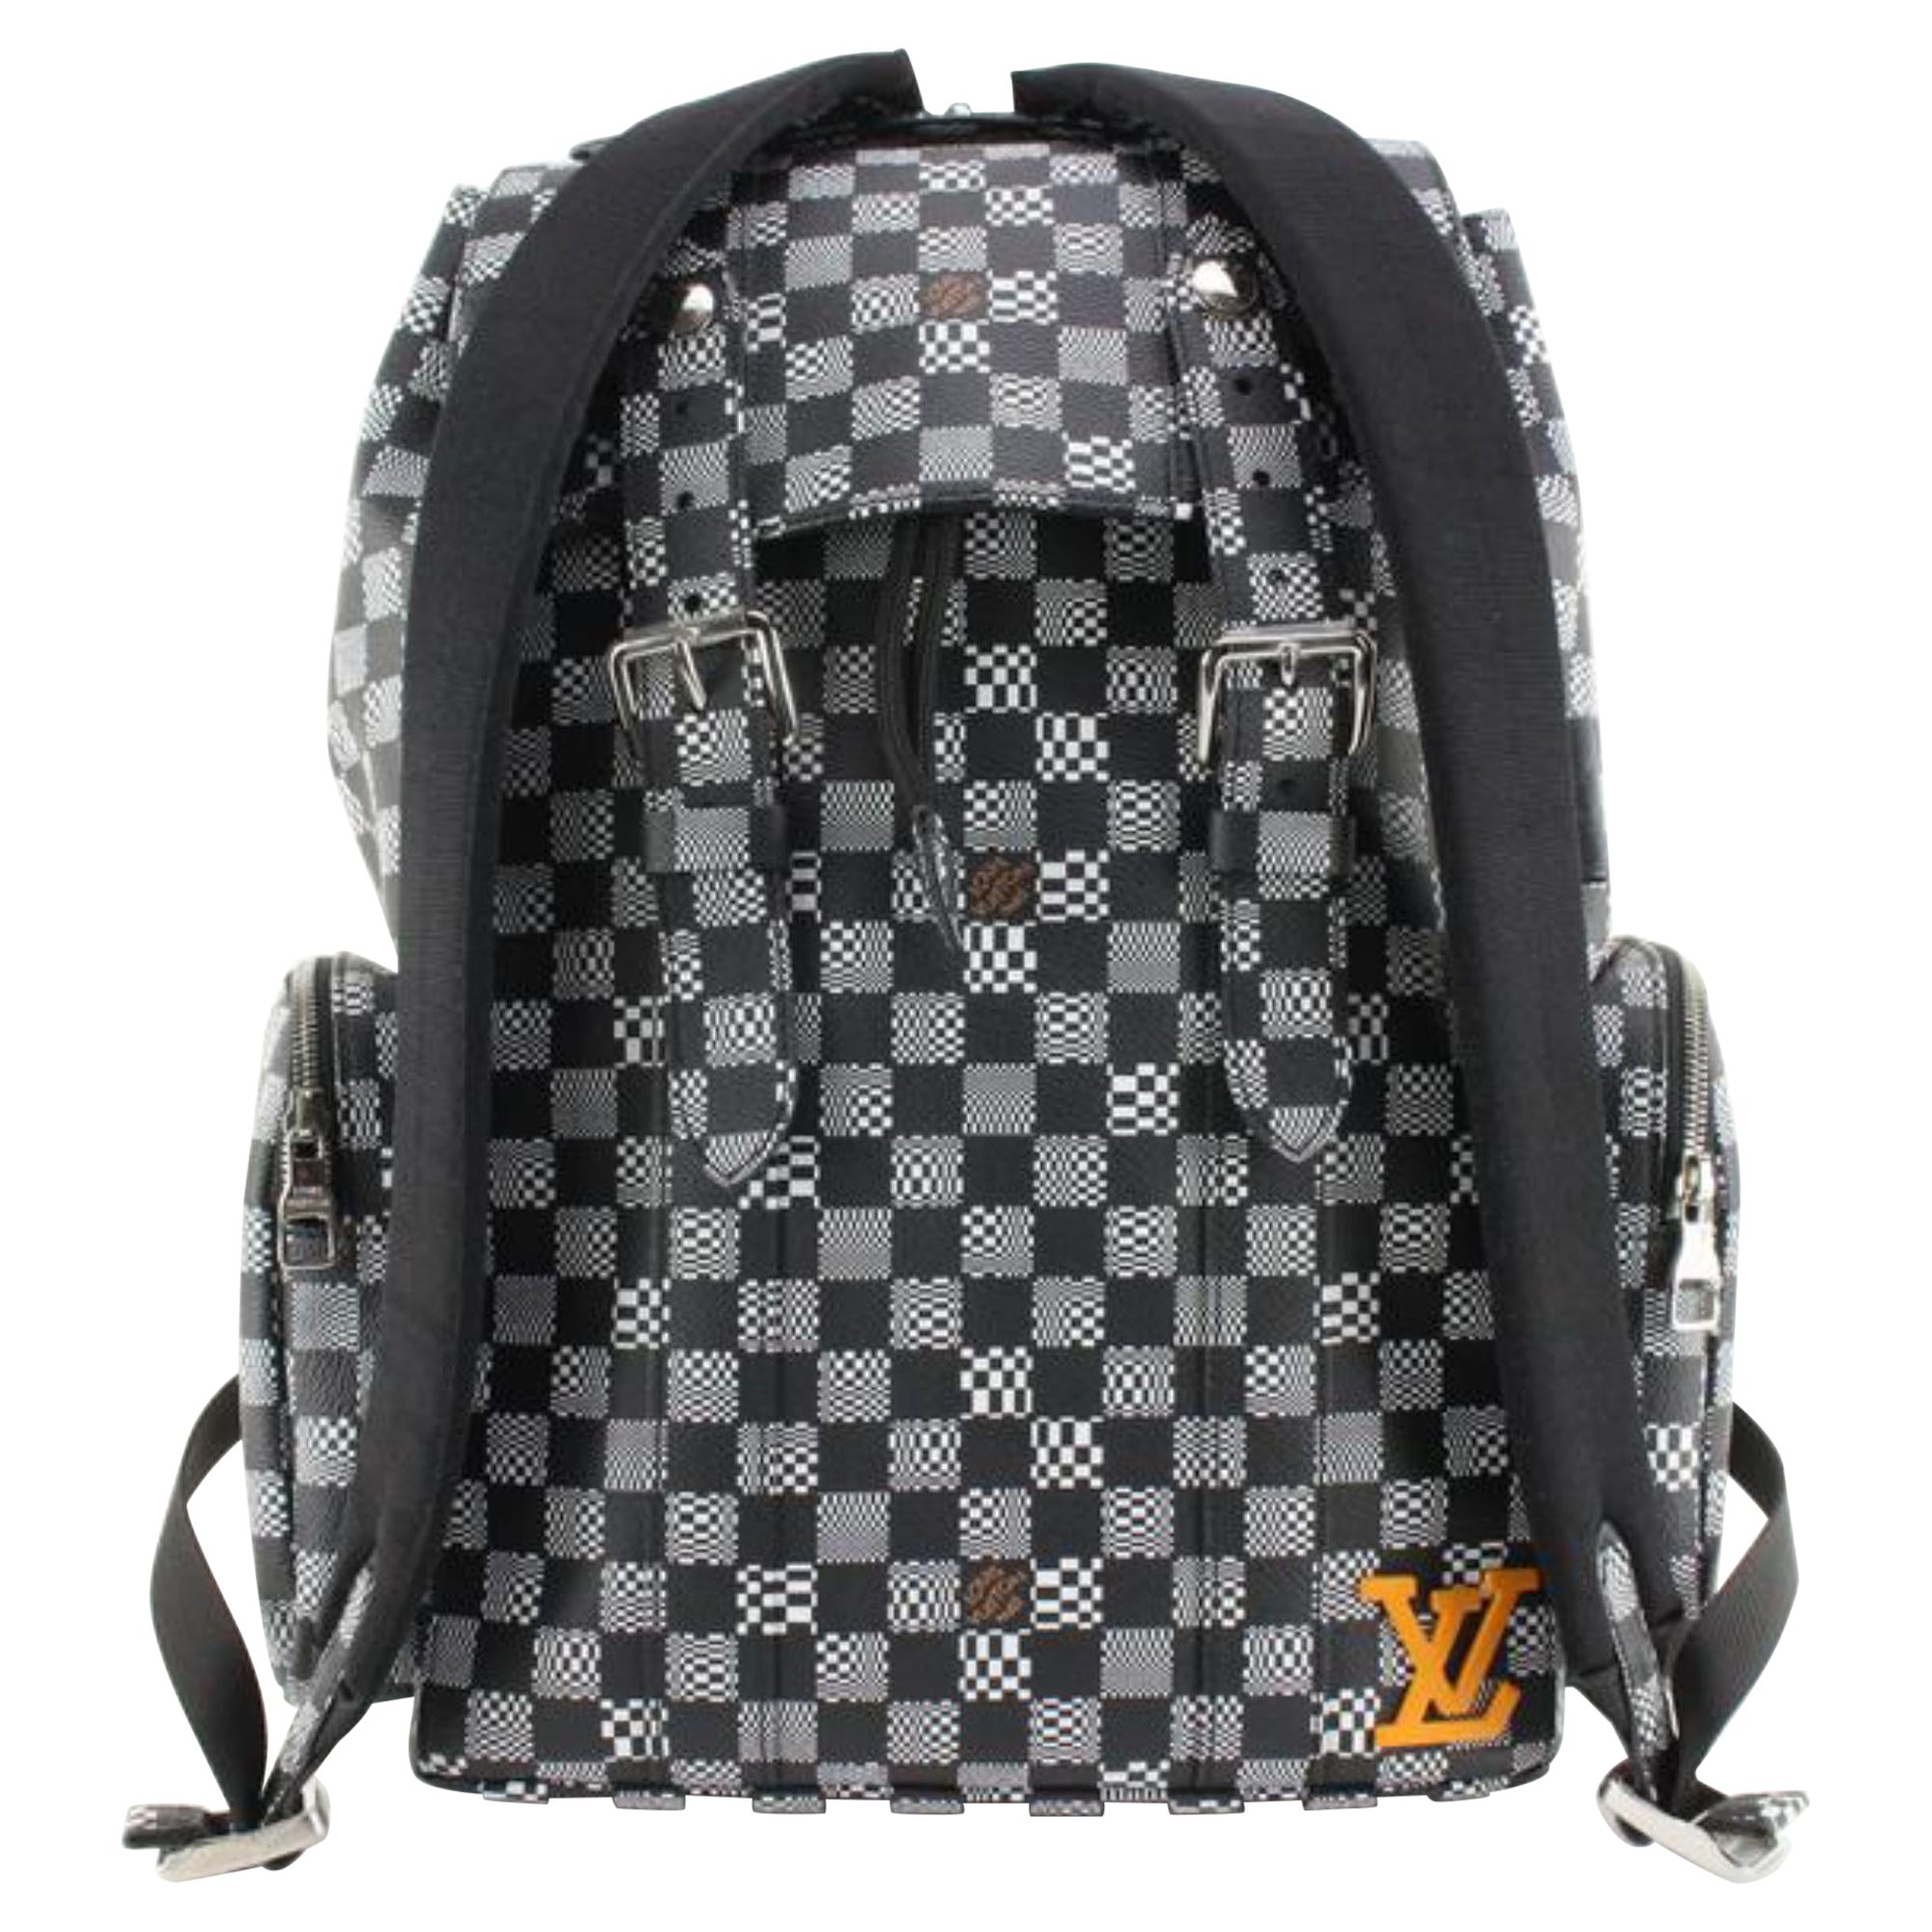 Christopher Backpack - 11 For Sale on 1stDibs  louis vuitton christopher  backpack mm, louis vuitton backpack christopher mm, christopher mm backpack  price